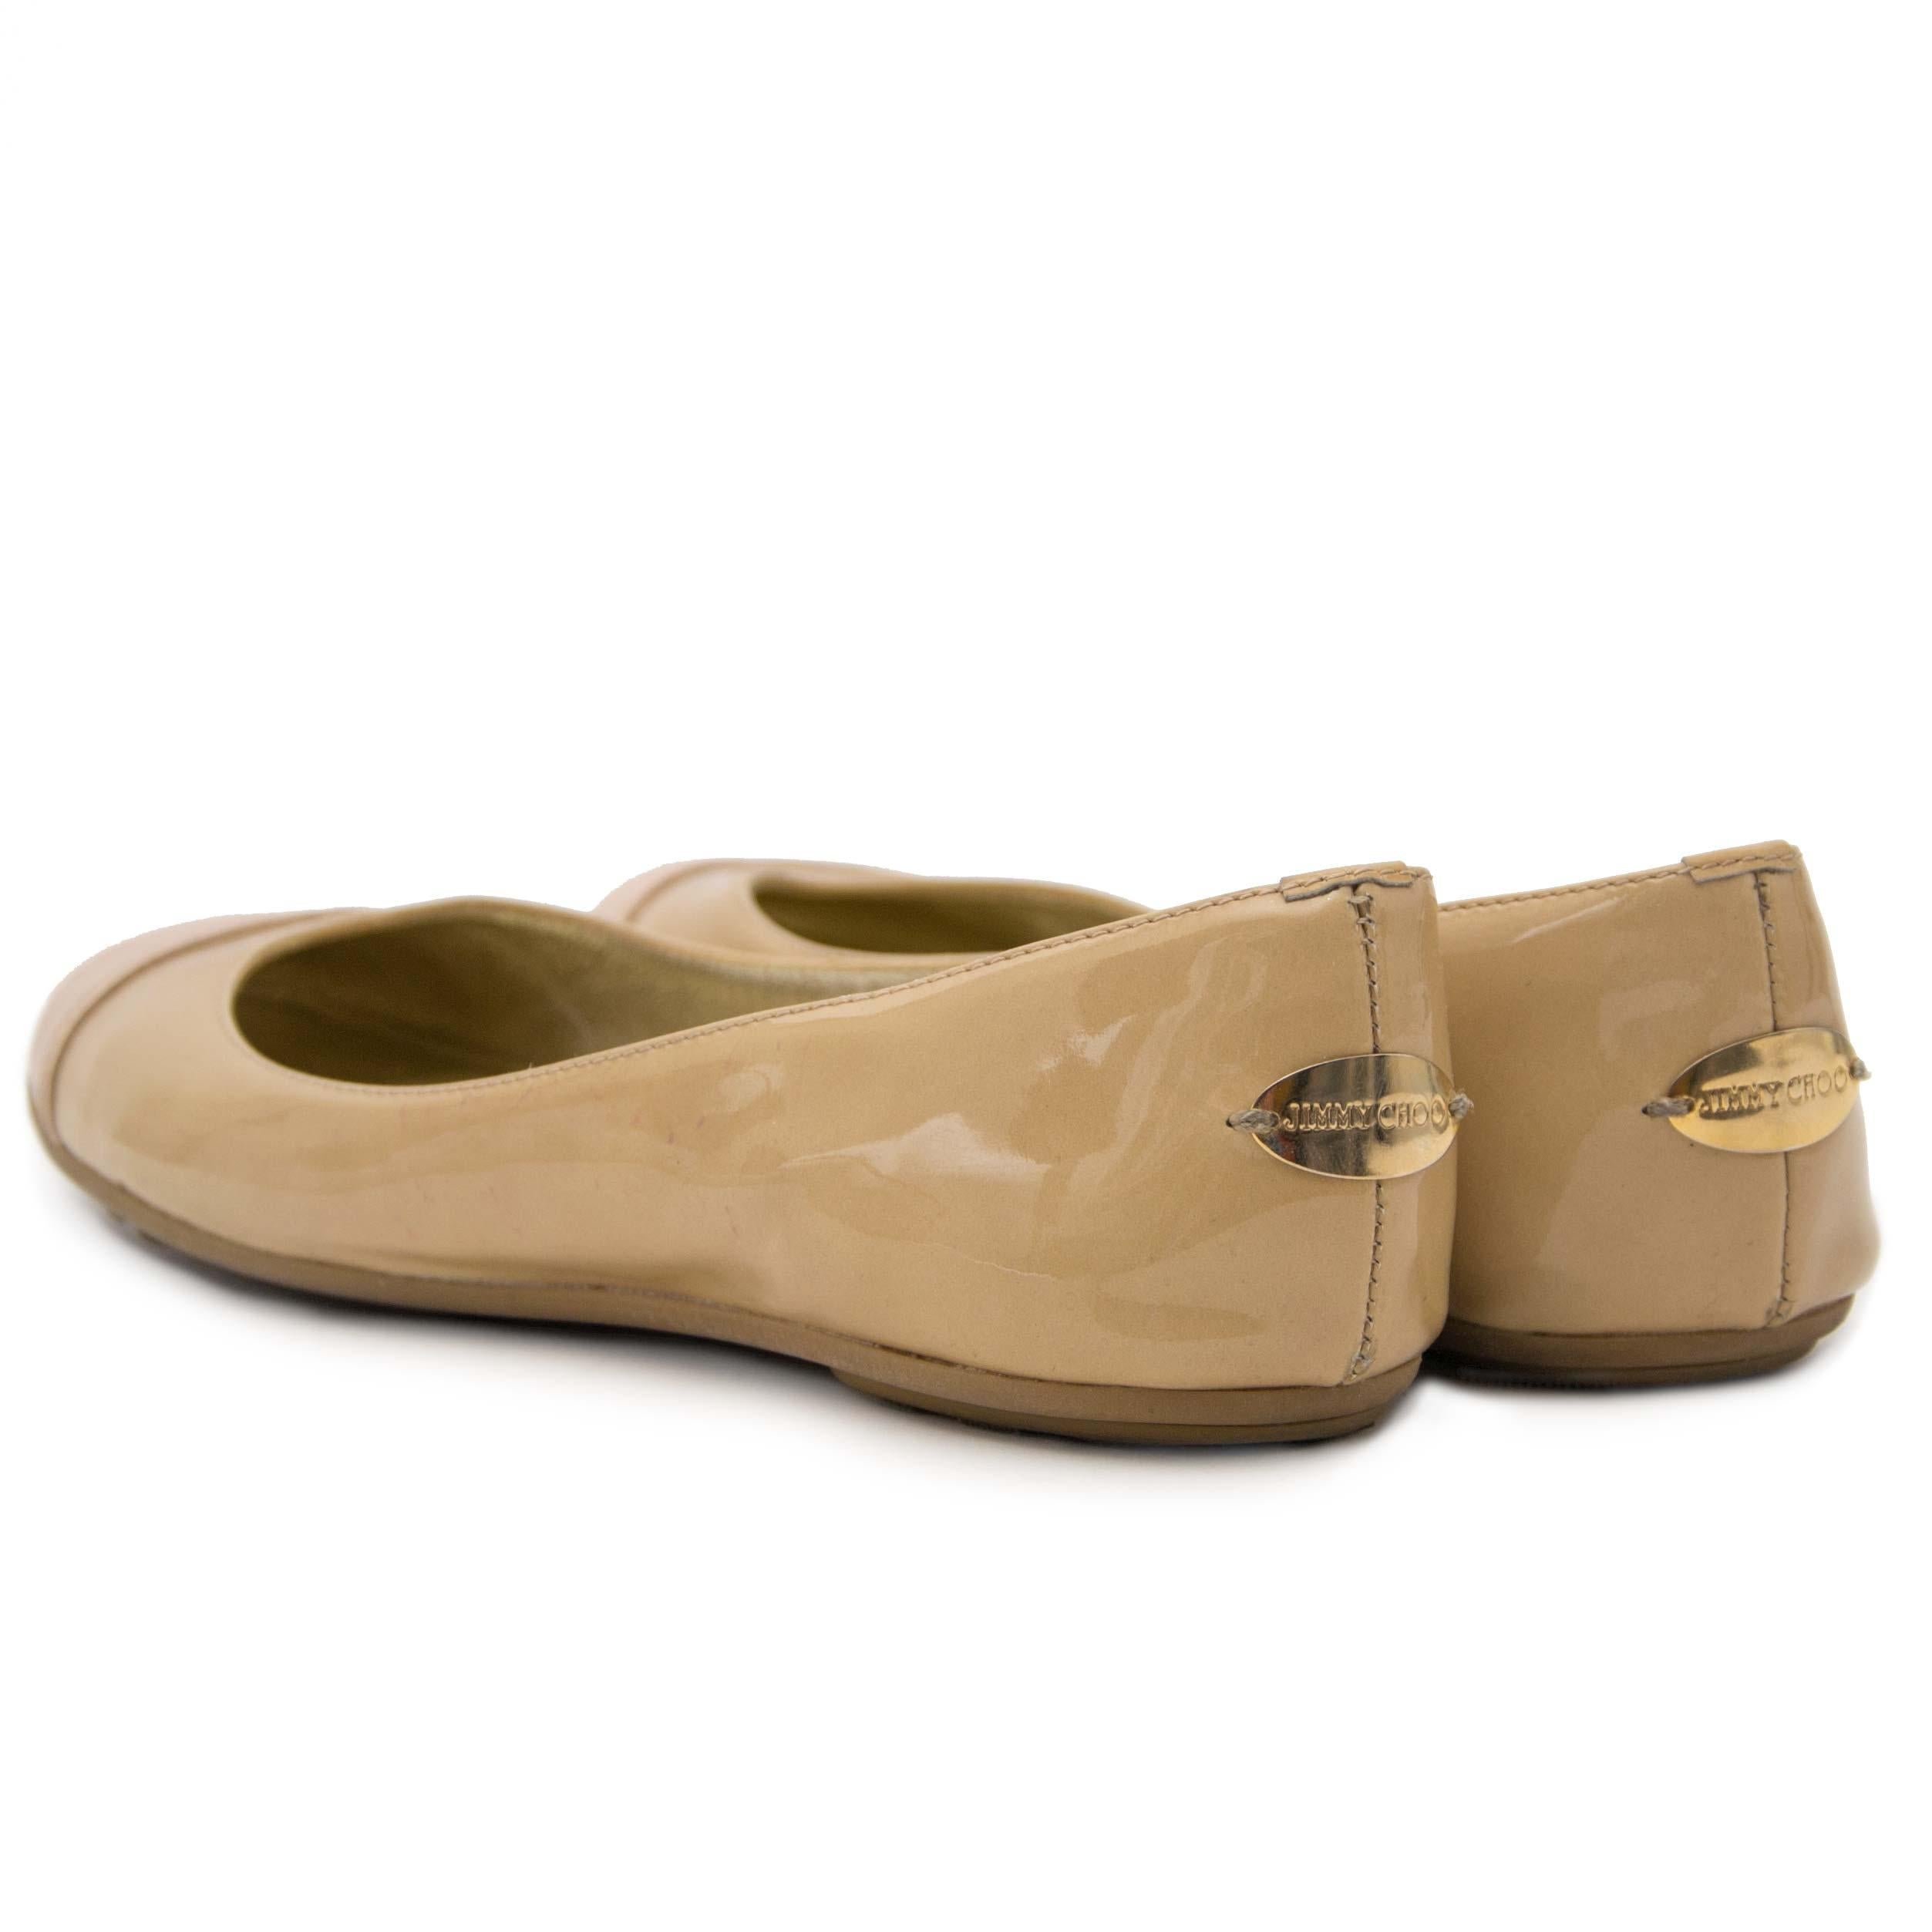 Good preloved condition!

Jimmy Choo Nude Beige Cap Toe Ballerina Flats - Size 35

The beige-toned flats by Jimmy Choo are the perfect shoes for Spring or Summer!
This cute ballerina flats are made of patent leather and features a round toe. 
The